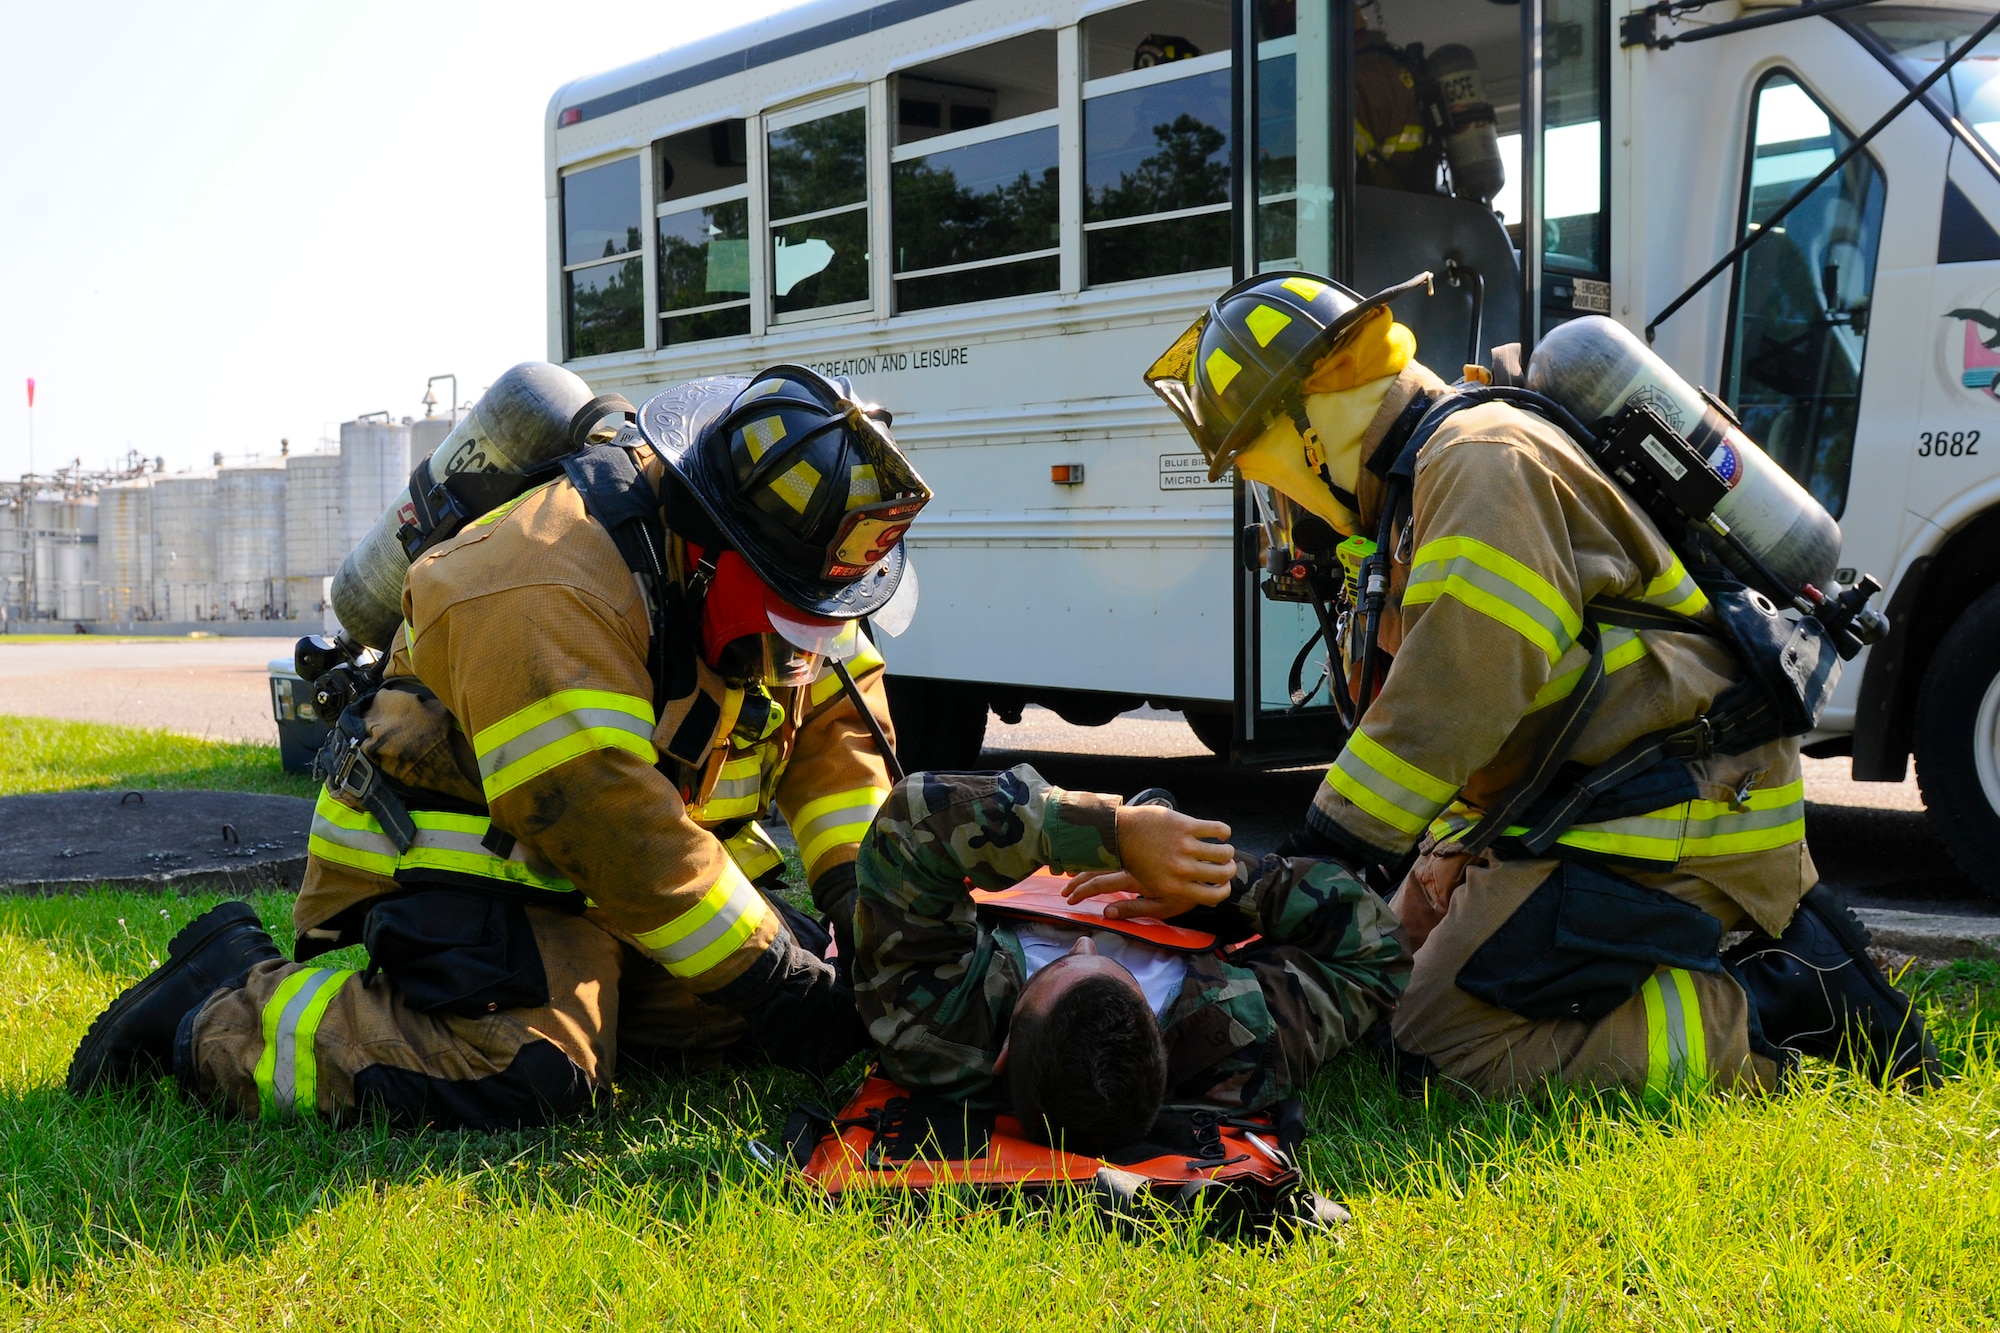 Georgetown County Fire/EMS first responders secure a simulated victim onto a stretcher during a bus crash scenario at a local company in Georgetown, S.C., June 5, 2014.  Georgetown County first responders and South Carolina National Guard Soldiers and Airmen are working side-by-side with the S.C. Emergency Management Division, to effectively respond to any hurricane that may threaten the state. The exercise is based on a hurricane post-landfall response between federal, state and local agencies, which includes training in communications, first responder skills, with the focus on how to better protect and assist citizens during emergency situations.  (U.S. Air National Guard photo by Tech. Sgt. Jorge Intriago/Released)
